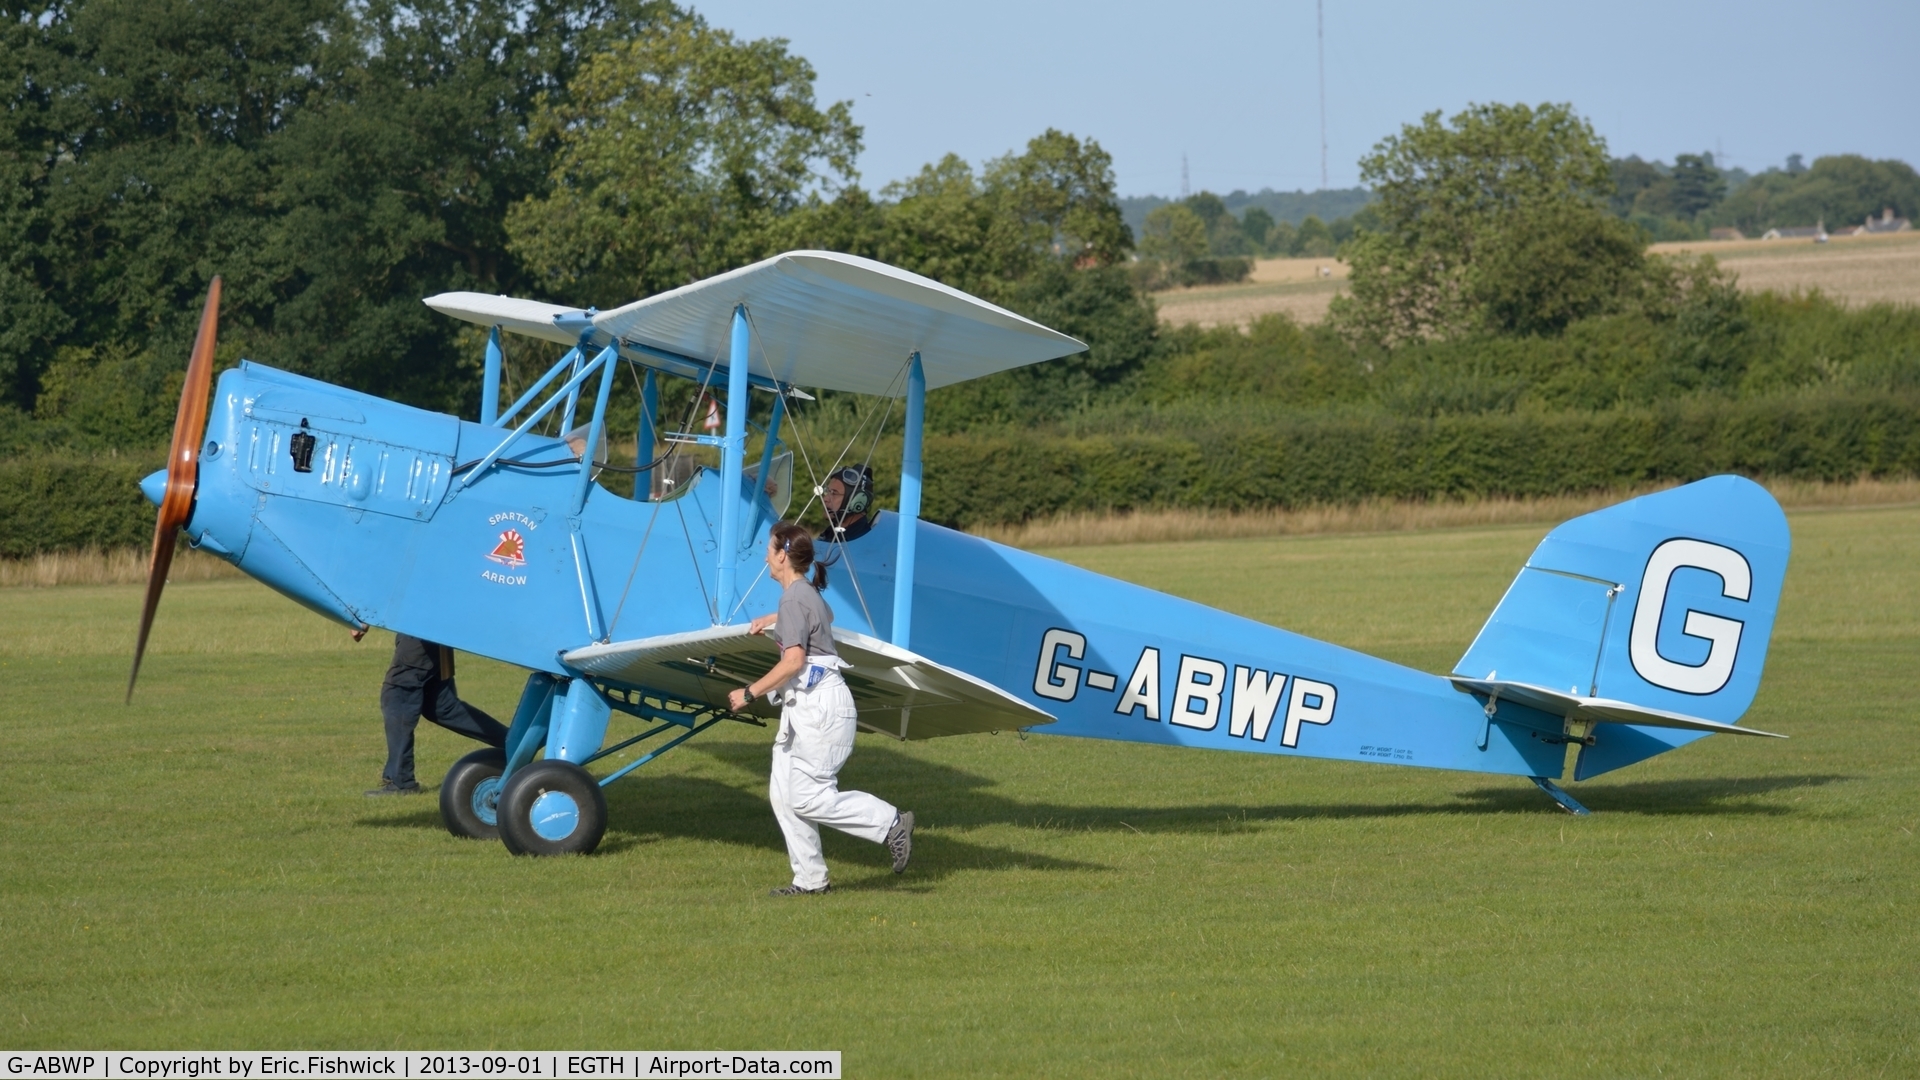 G-ABWP, 1932 Spartan Arrow C/N 78, 5. G-ABWP at The Shuttleworth Collection's 50th Anniversary Pagent Flying Day, September 2013.